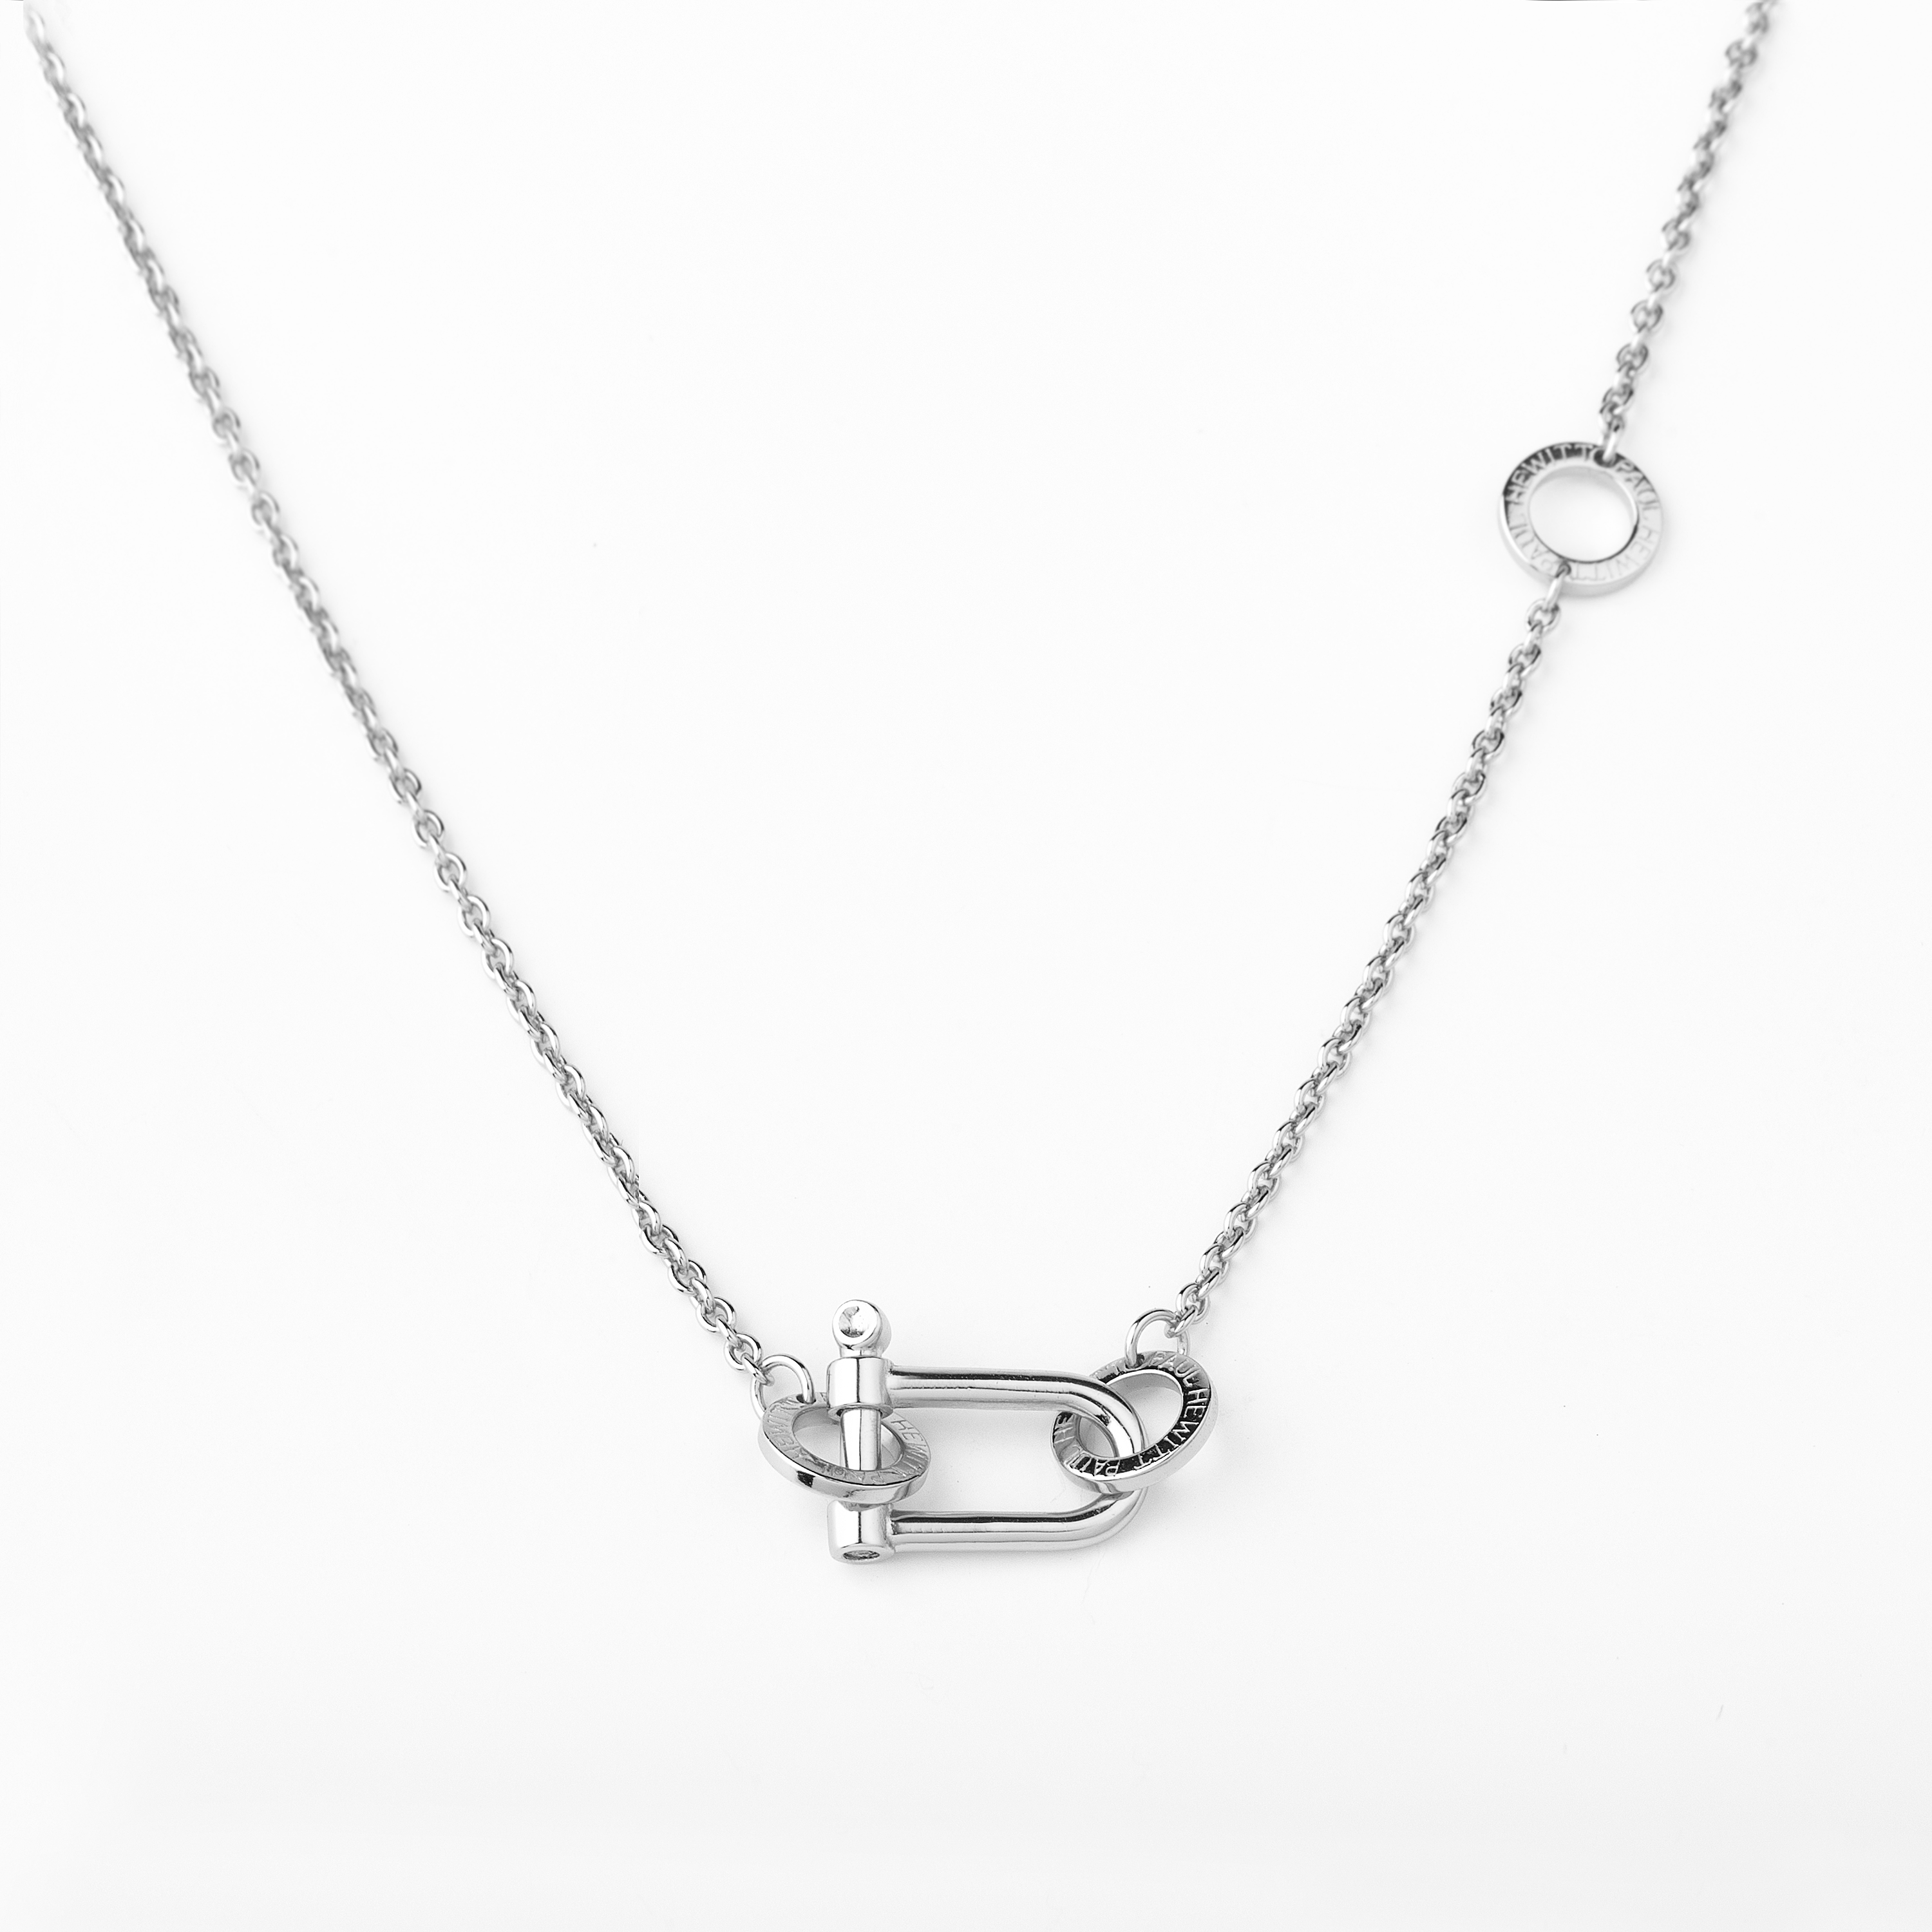 Necklace Shackle Heart of the Sea Sterling Silver Rhodium Plated